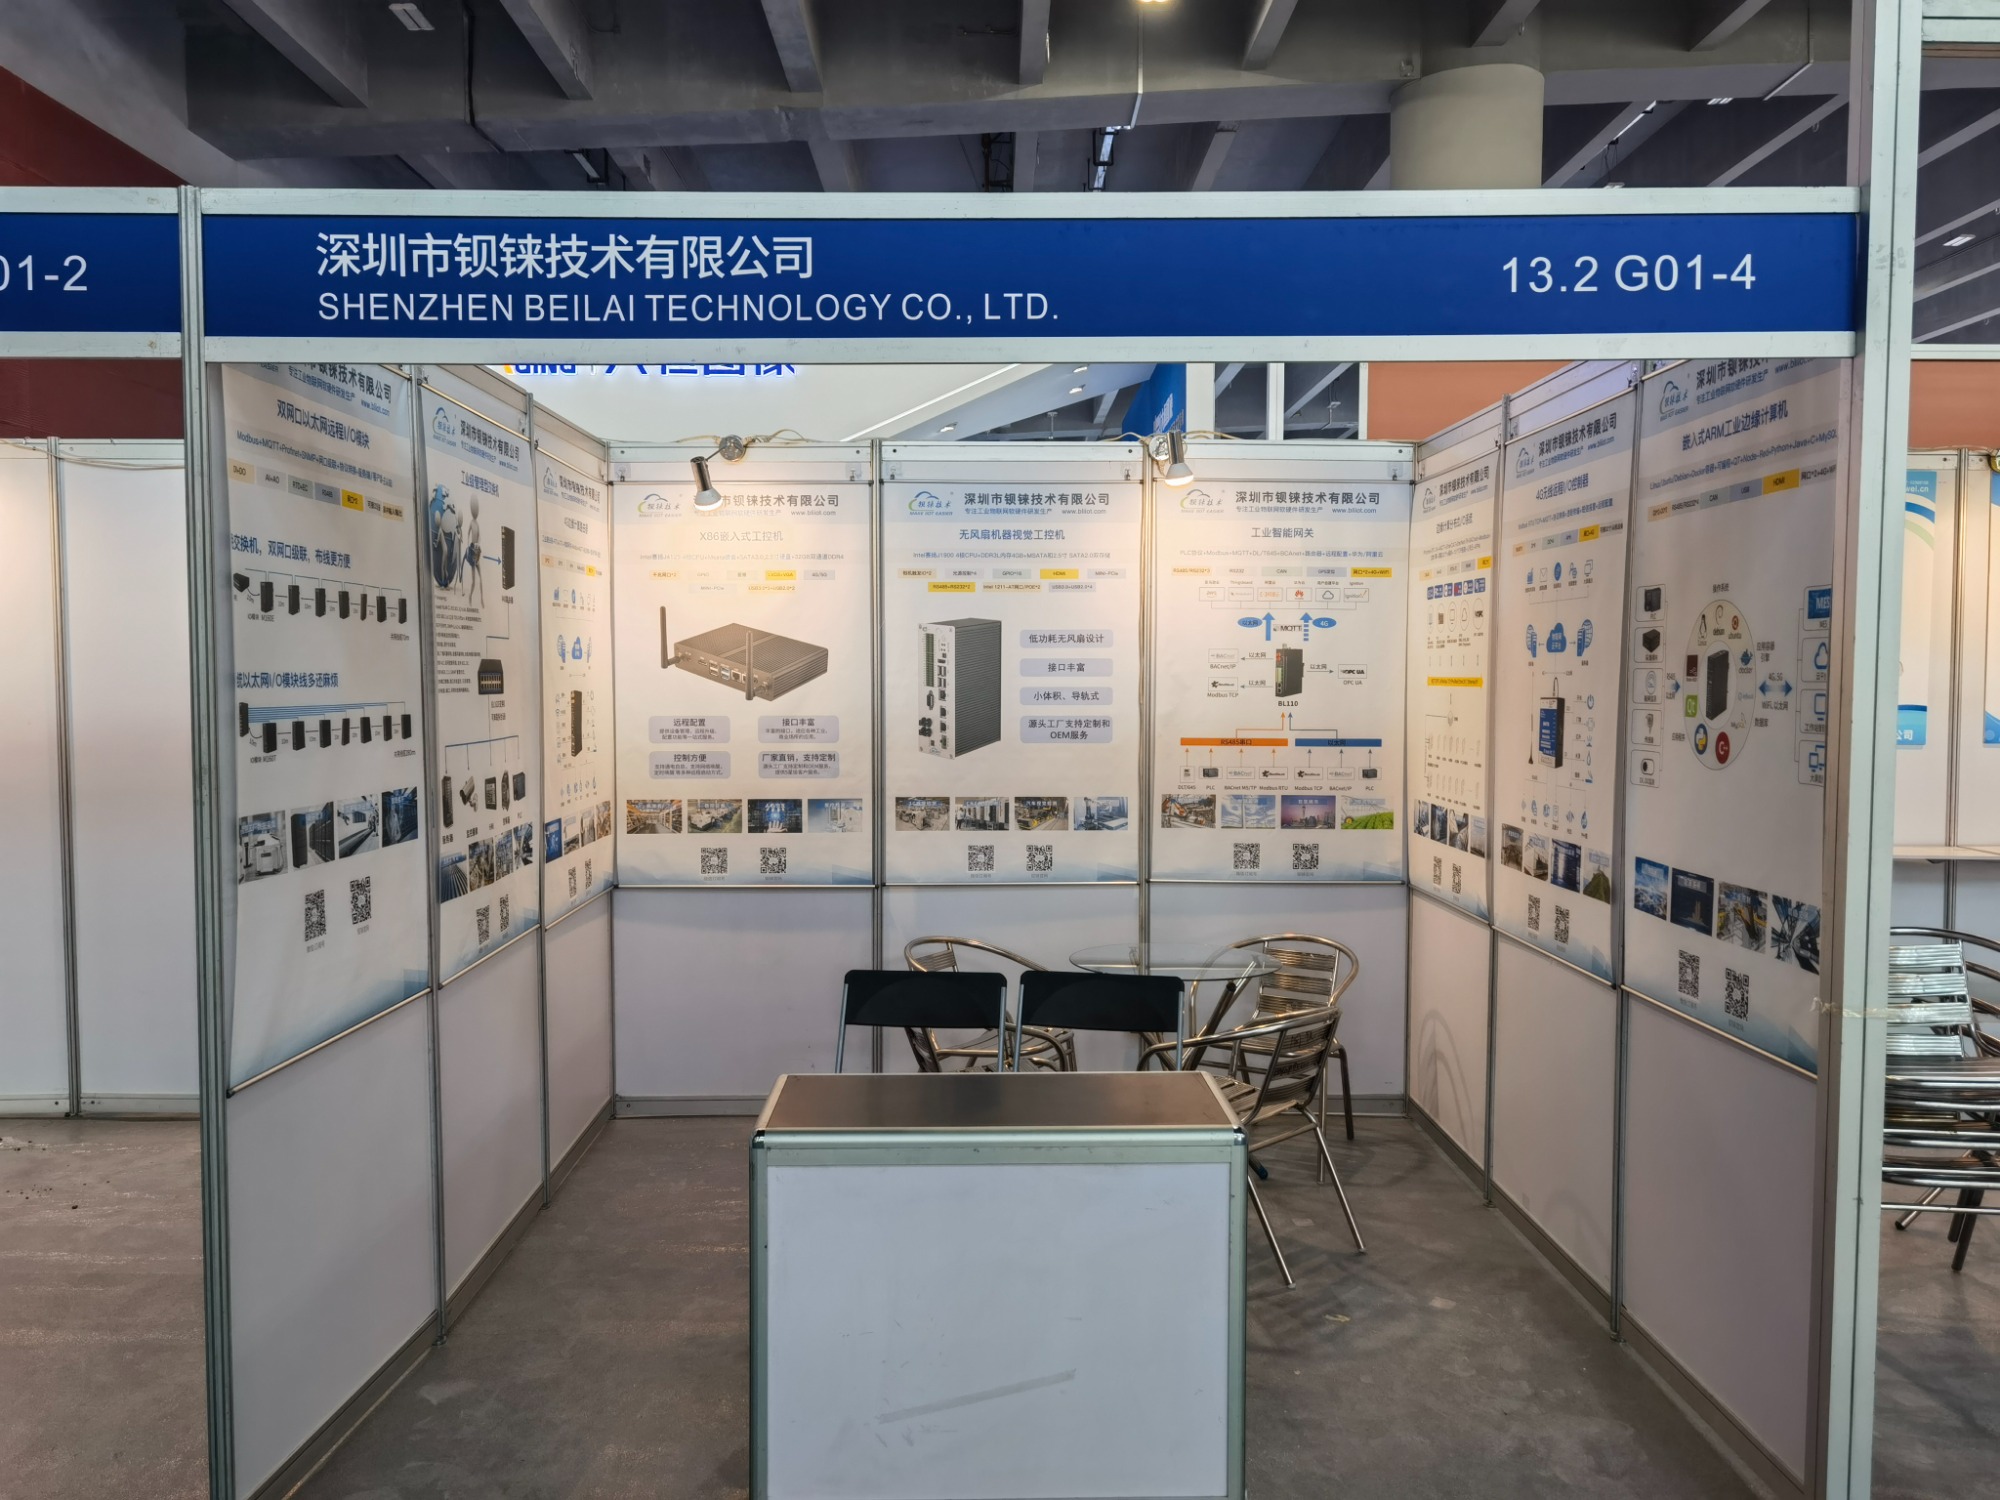 Guangzhou International Automation Technology and Equipment Exhibition (SIAF) will be held in March 2023!